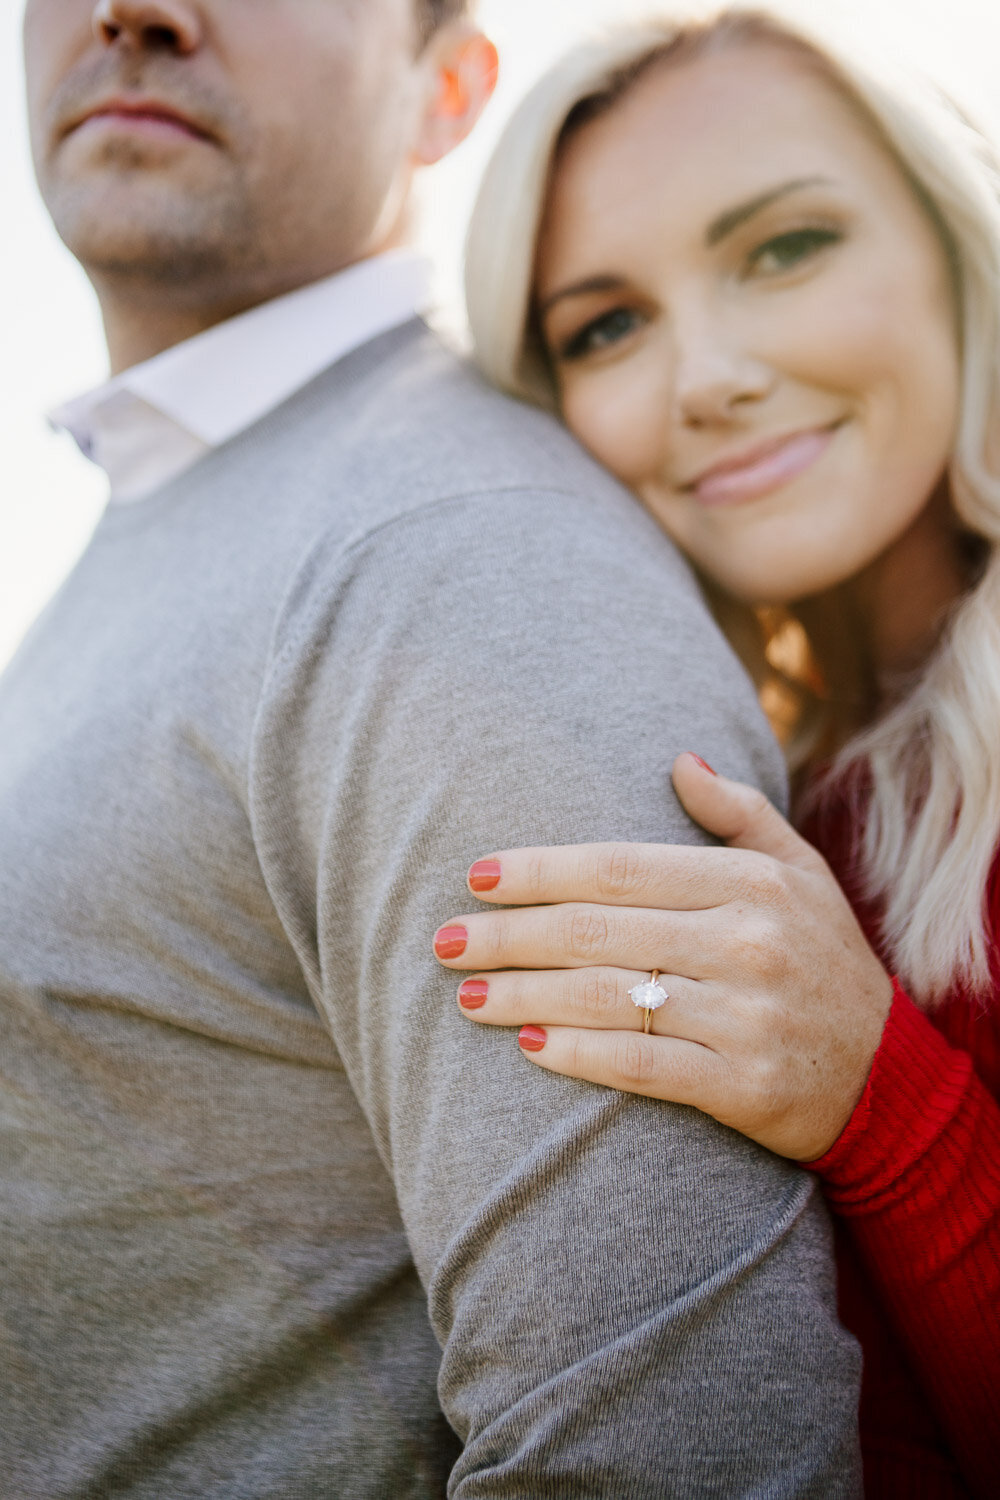 Couple embracing and focusing on engagement ring on woman's hand